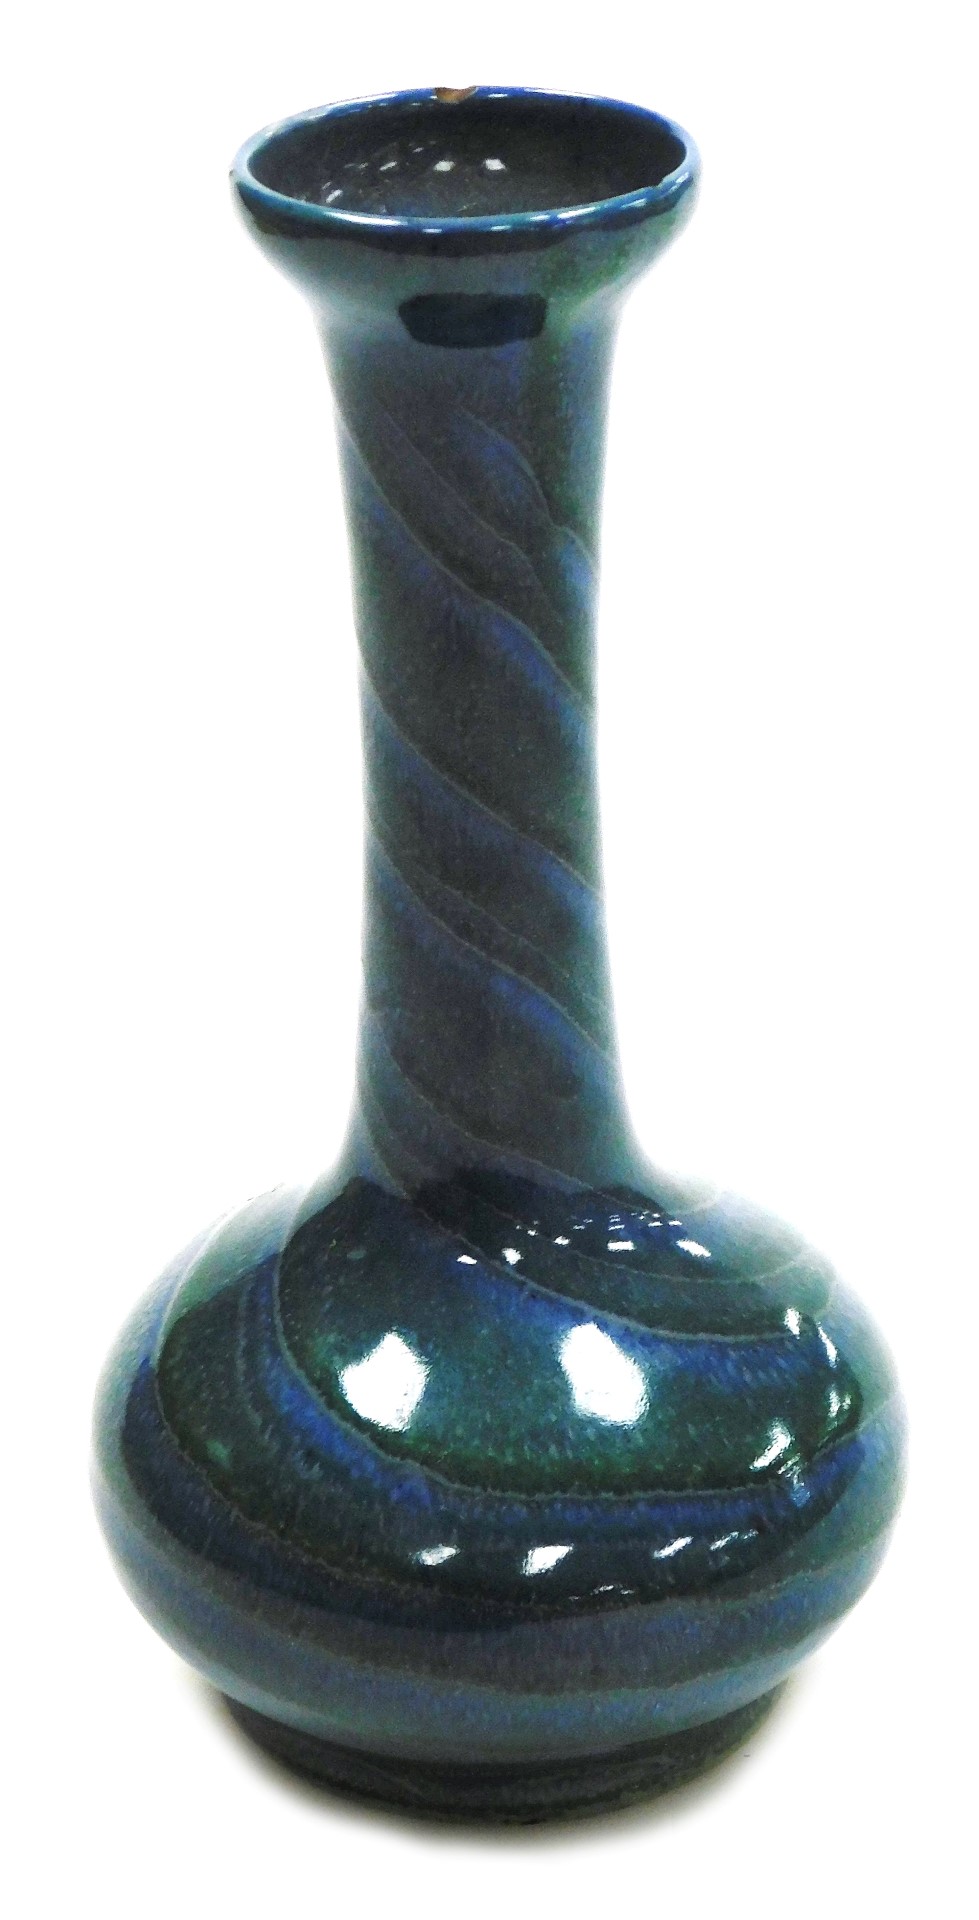 A Moorcroft pottery bottle vase, with a squat body and elongated neck with flared rim, decorated in